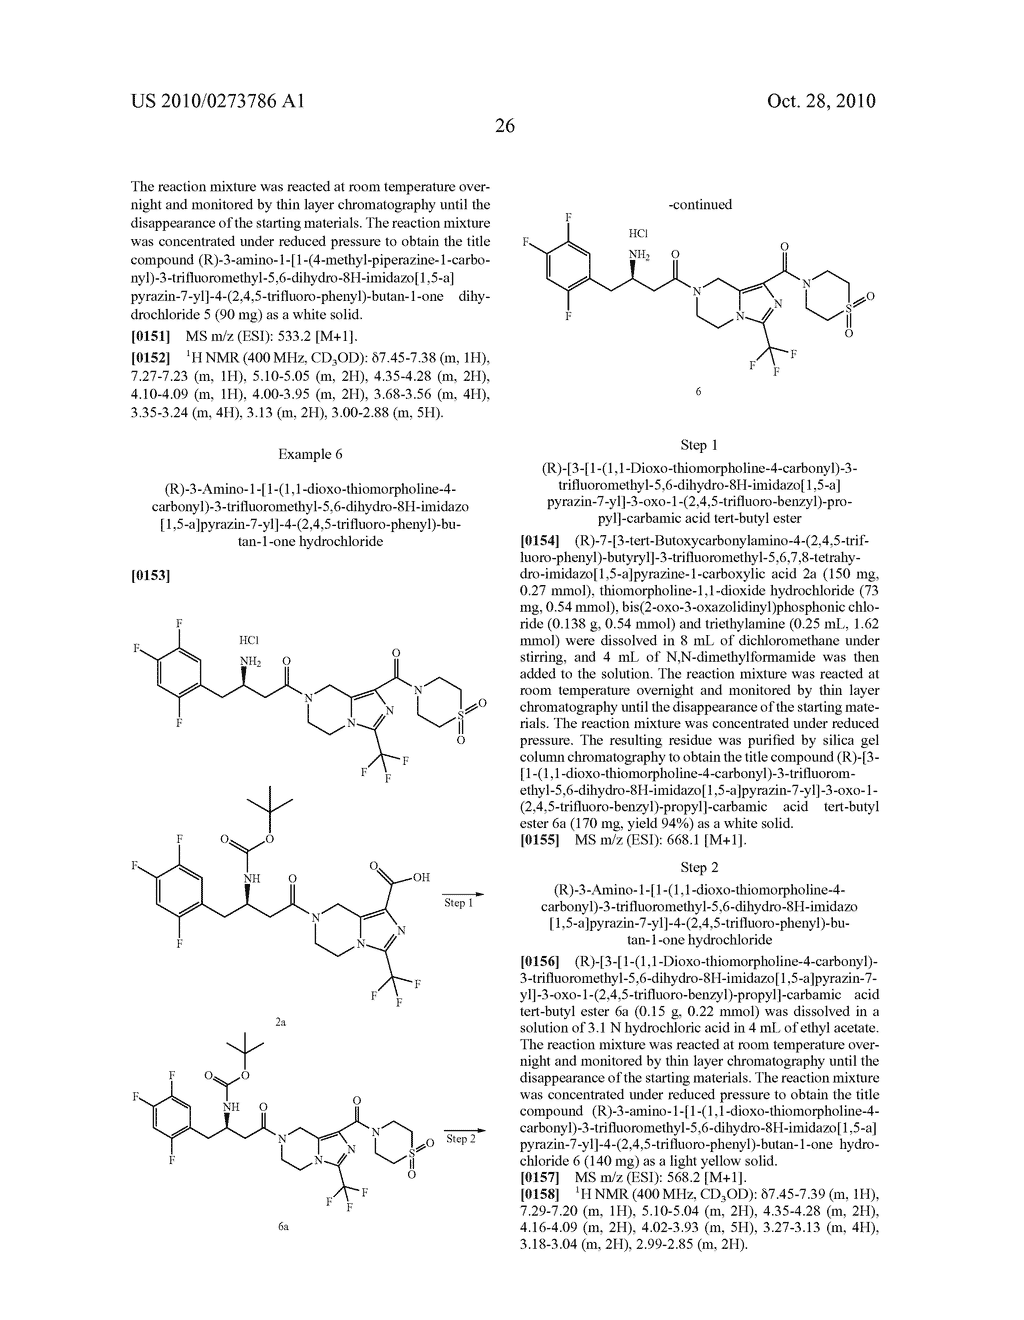 TETRAHYDRO-IMIDAZ0[1,5-A]PYRAZINE DERIVATIVES, PREPARATION PROCESS AND MEDICINAL USE THEREOF - diagram, schematic, and image 27